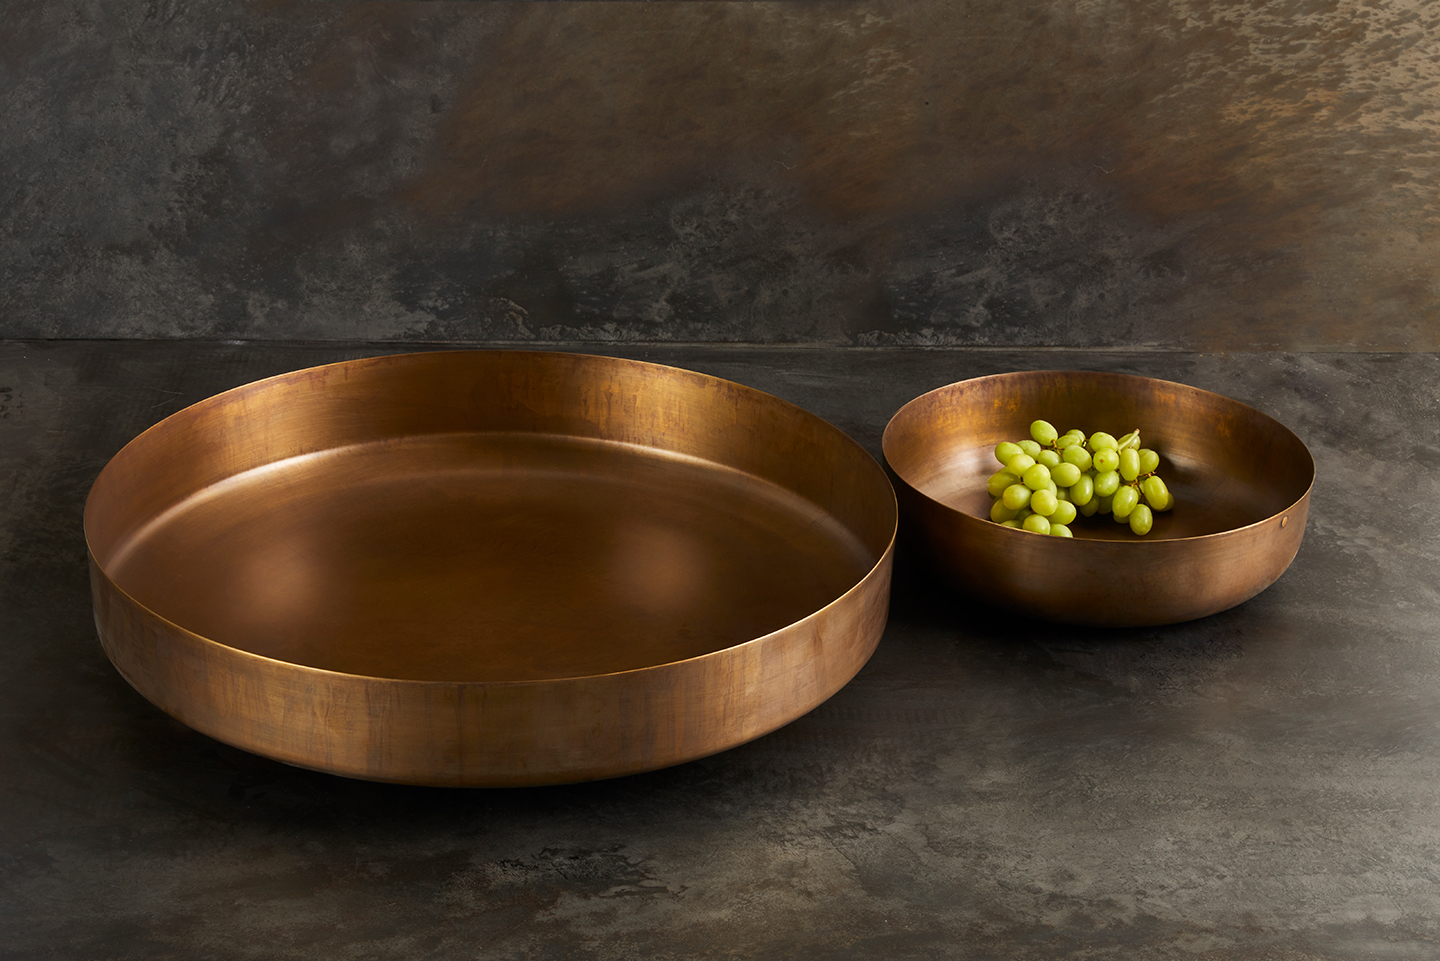 A modern room accessory. These stylish brass bowls are handcrafted from sheets of spun metal and finished with our signature evolving patina. Available for purchase at Studio Sturdy and created by Martha Sturdy